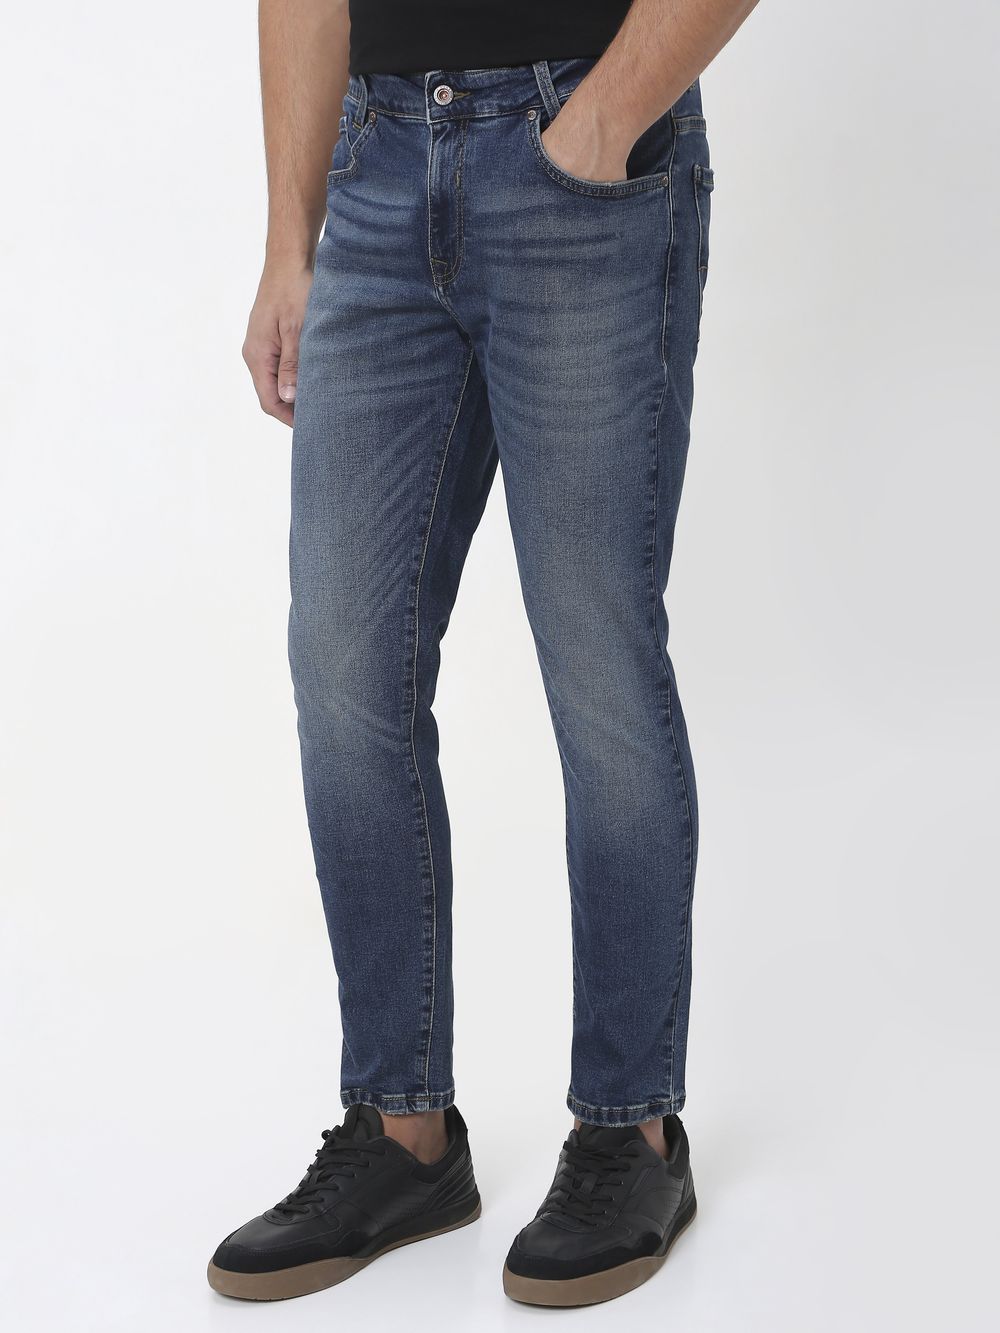 Tinted Ankle Length Originals Stretch Jeans